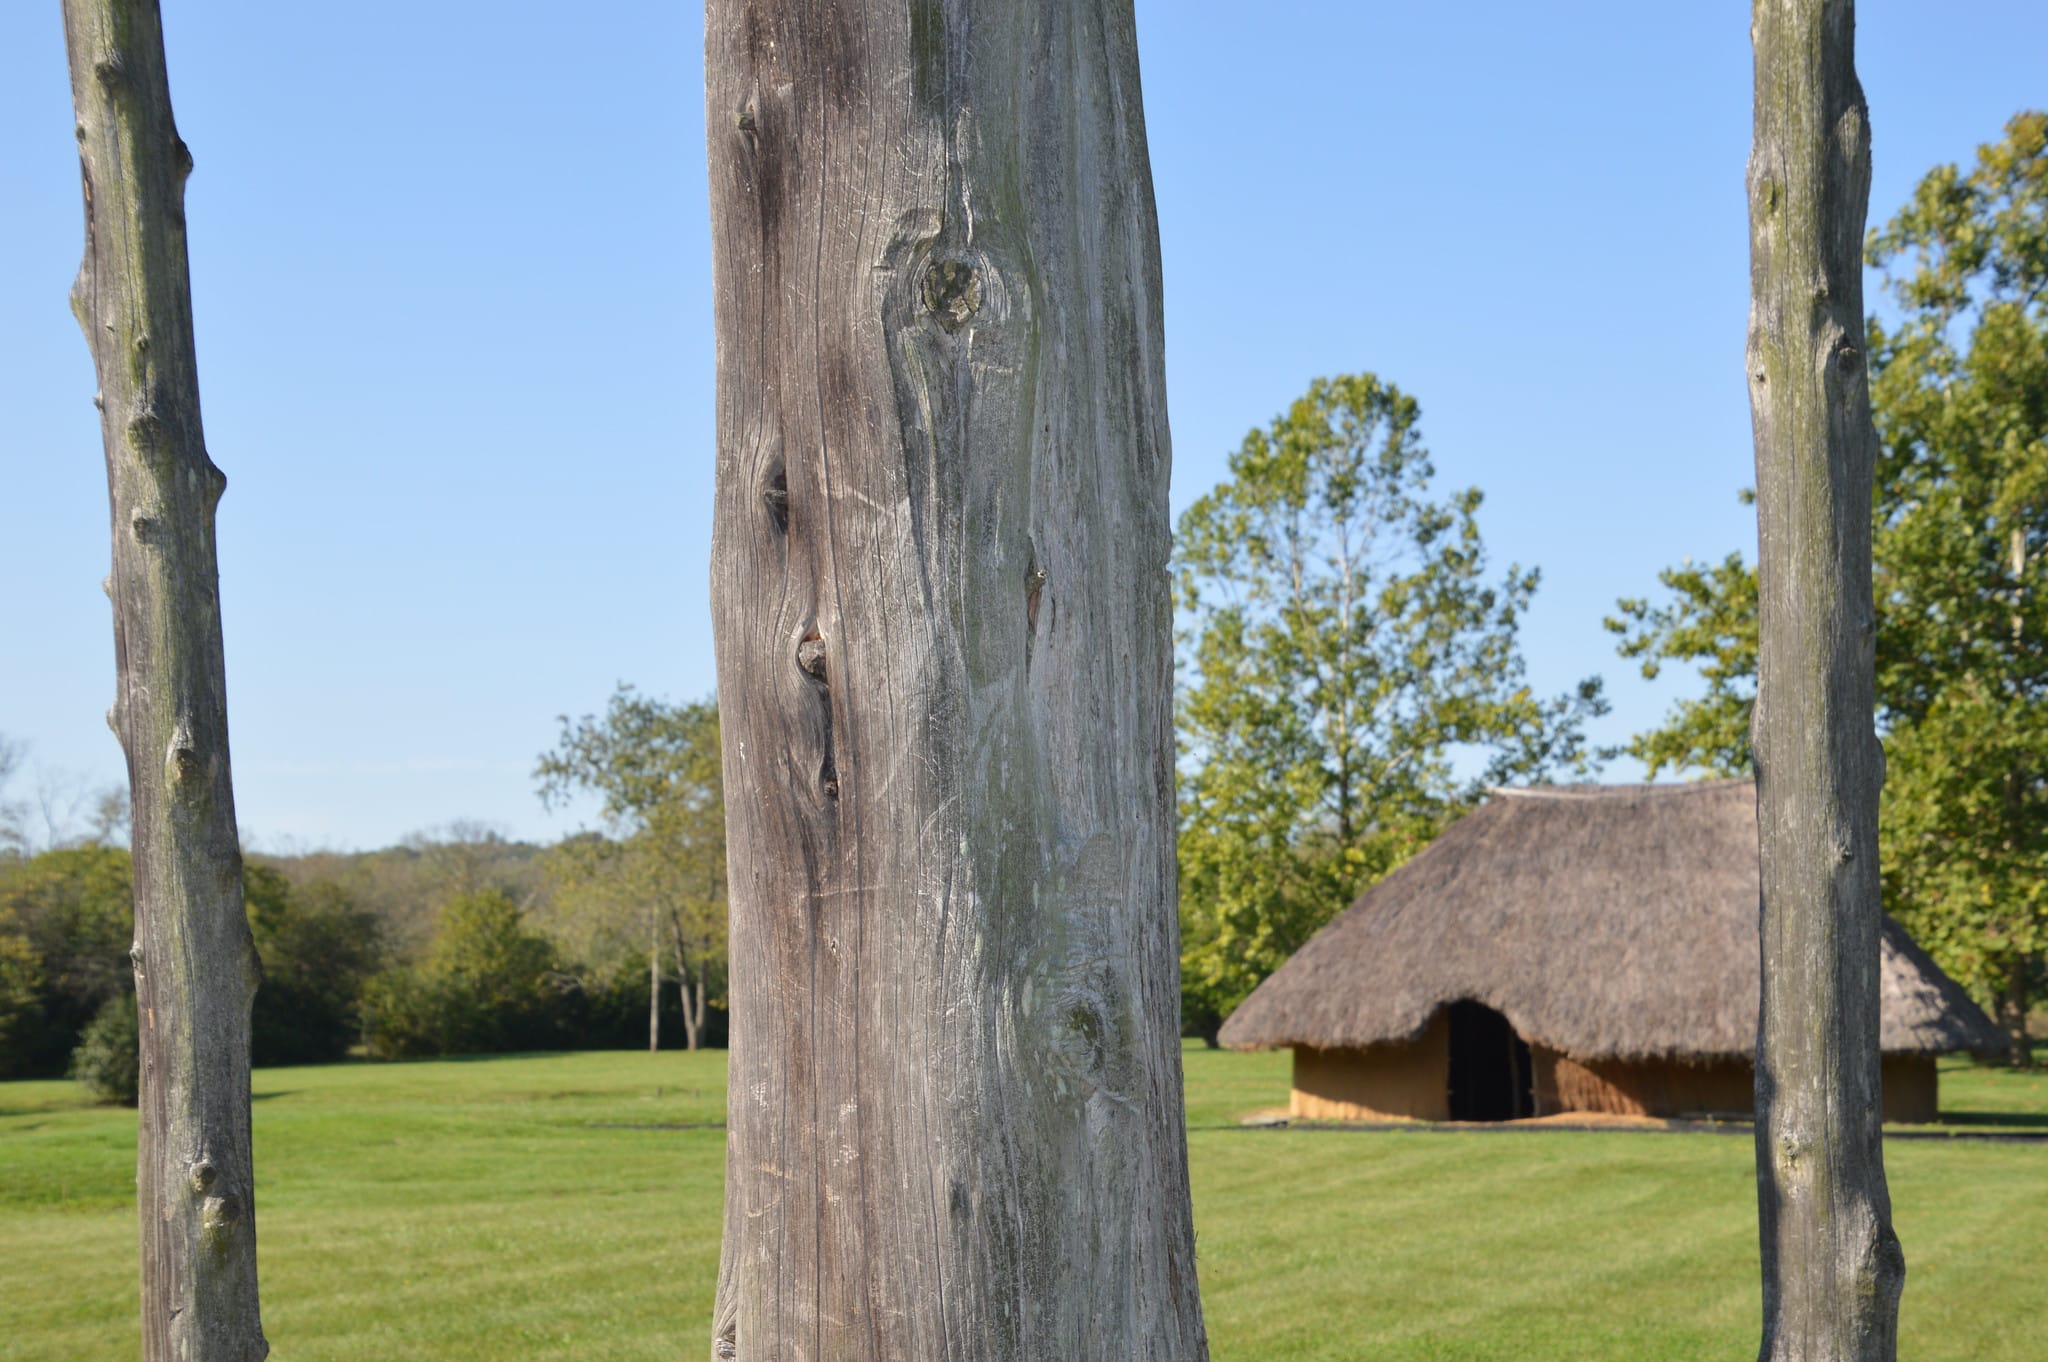 horizontal photo of a thatched indian hut in a cut-grass field seen through three straight tree trunks